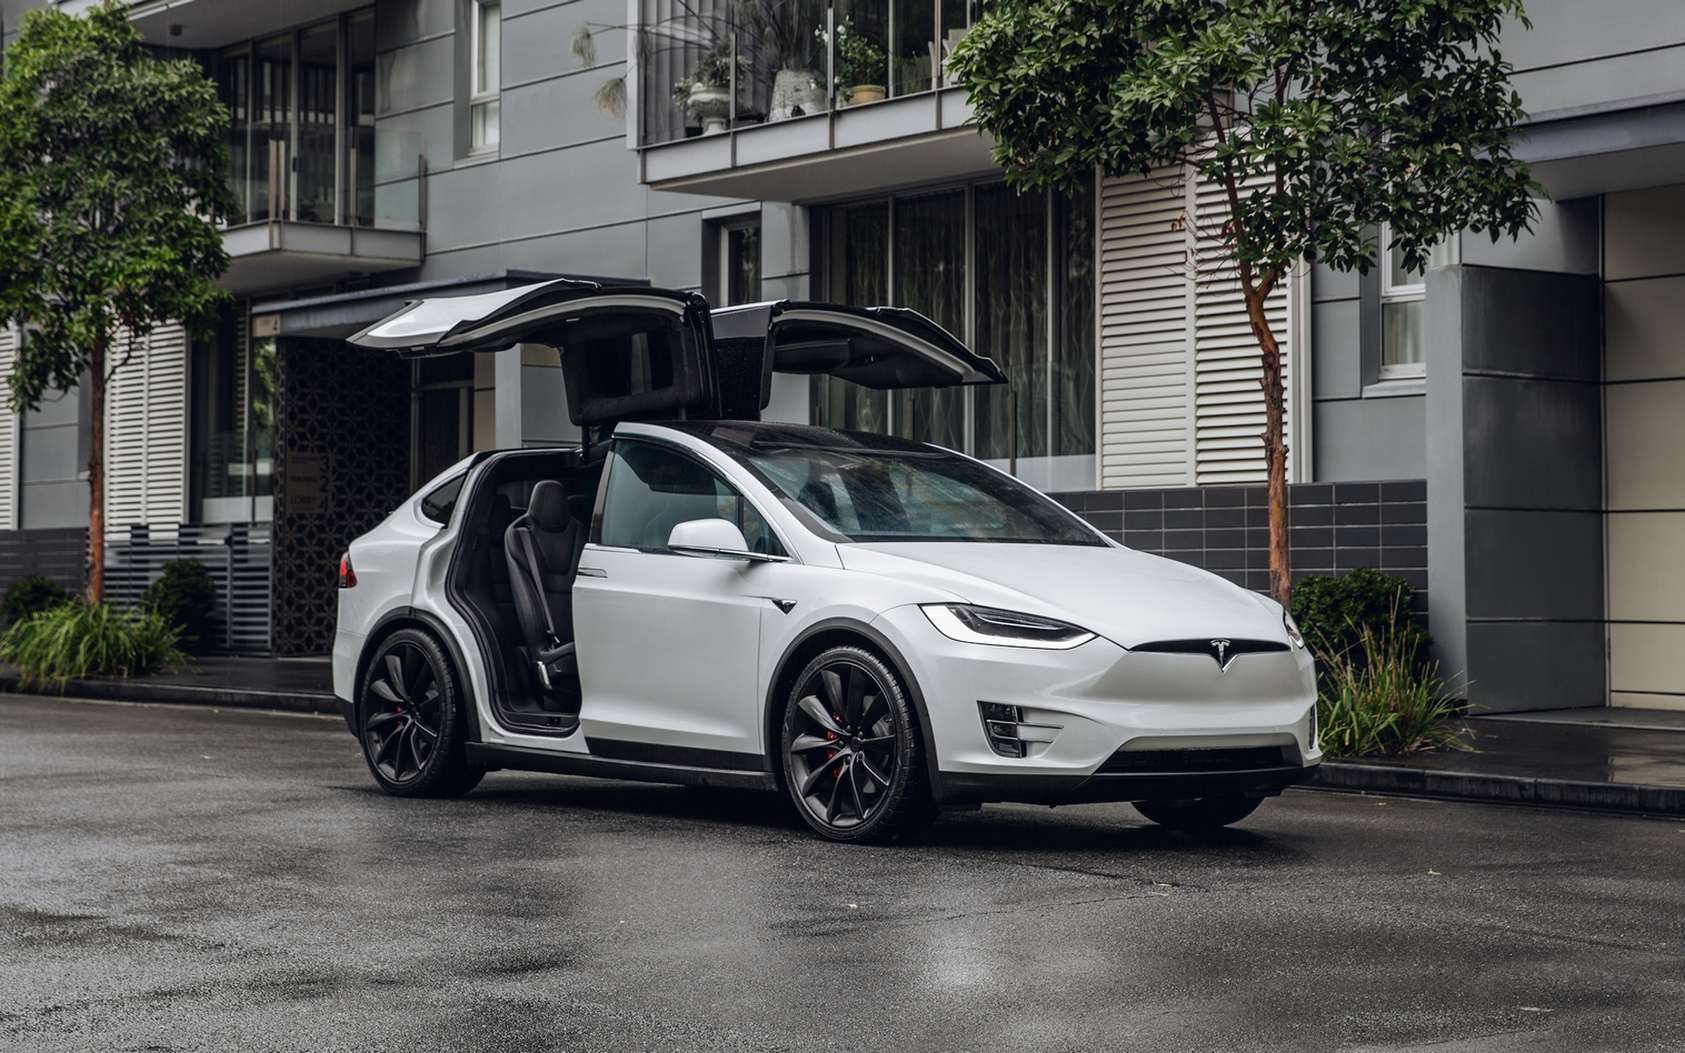 he-paid-less-than-30-000-euros-for-this-used-tesla-model-x-with-more